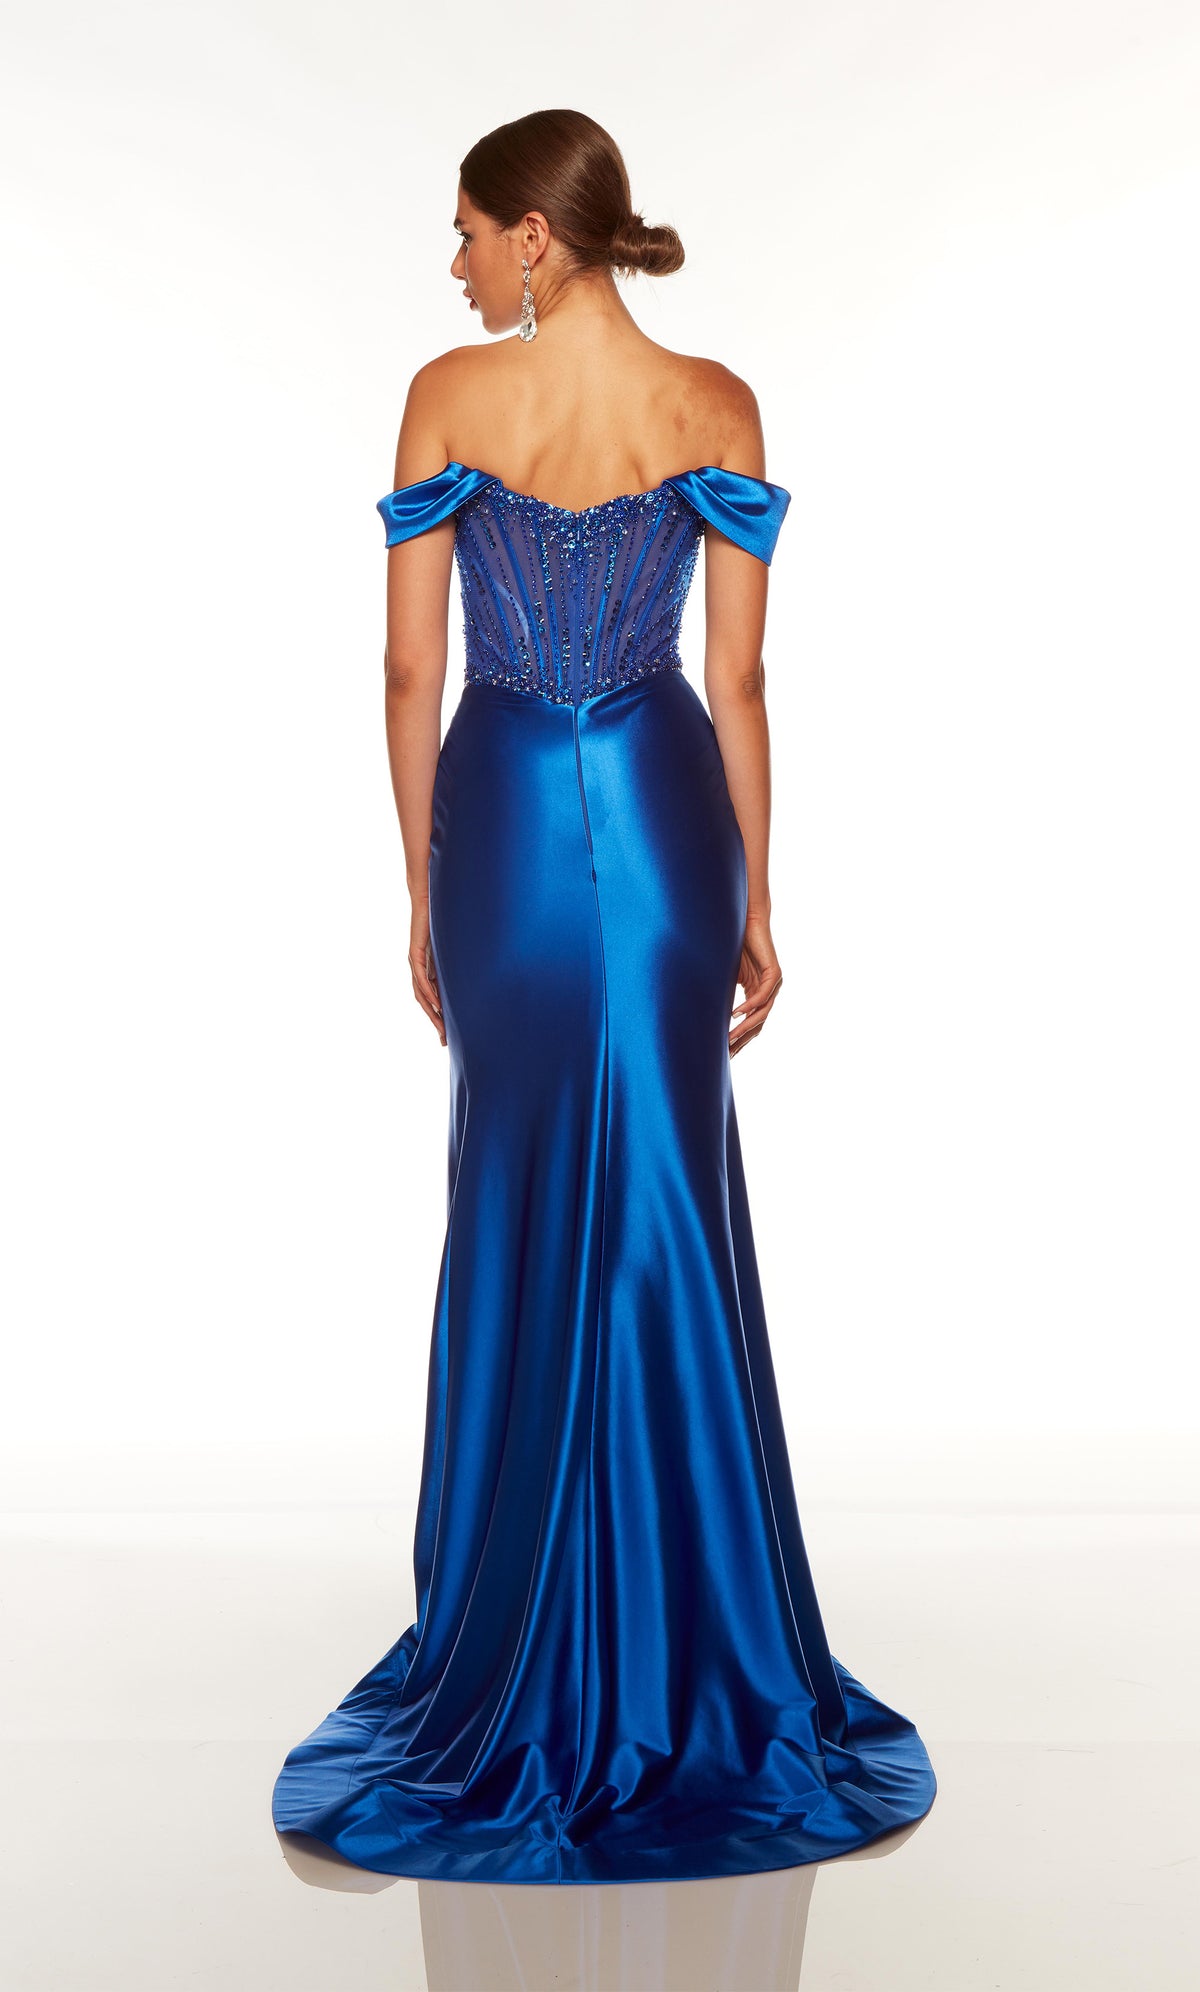 Royal blue corset gown with a sheer embellished bodice, zip up back, and train.